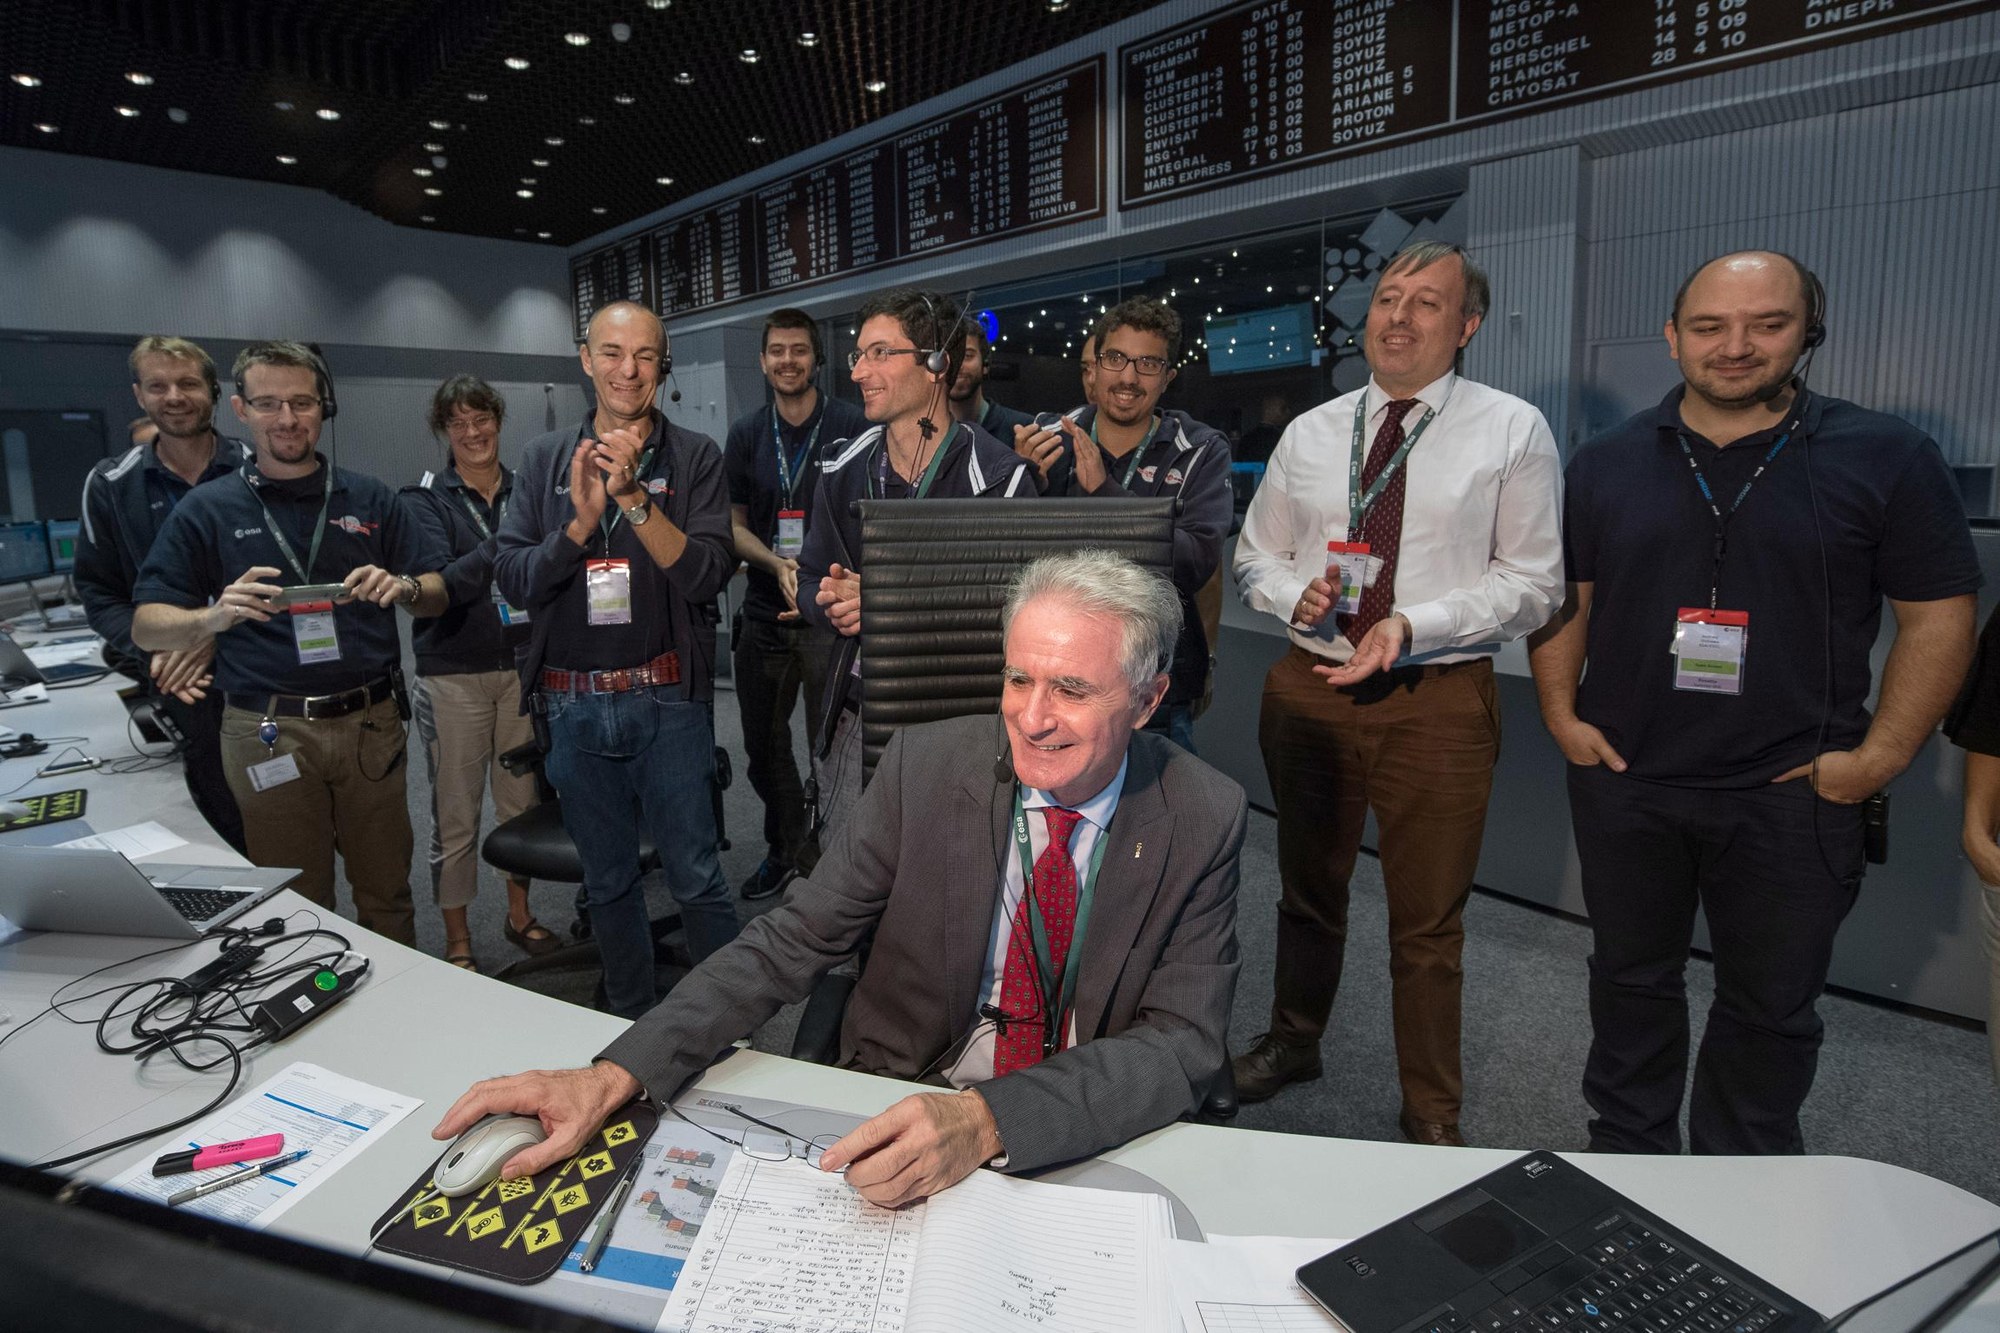 Paolo Ferri, Head of Mission Operations at ESA, clicks on the mouse to send the final control command to Rosetta on 30 September 2016